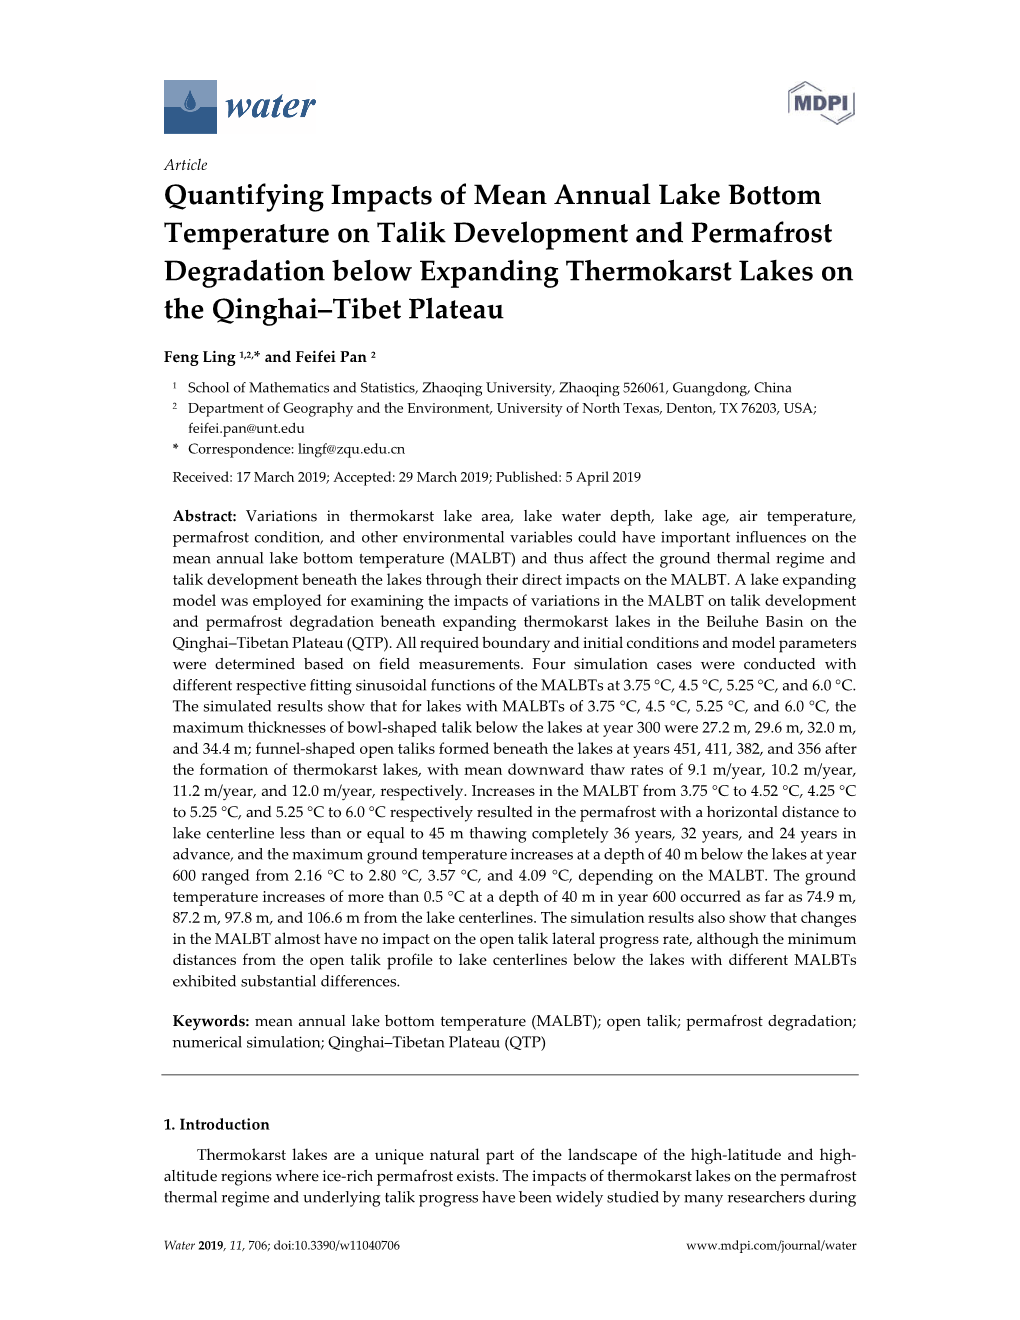 Quantifying Impacts of Mean Annual Lake Bottom Temperature on Talik